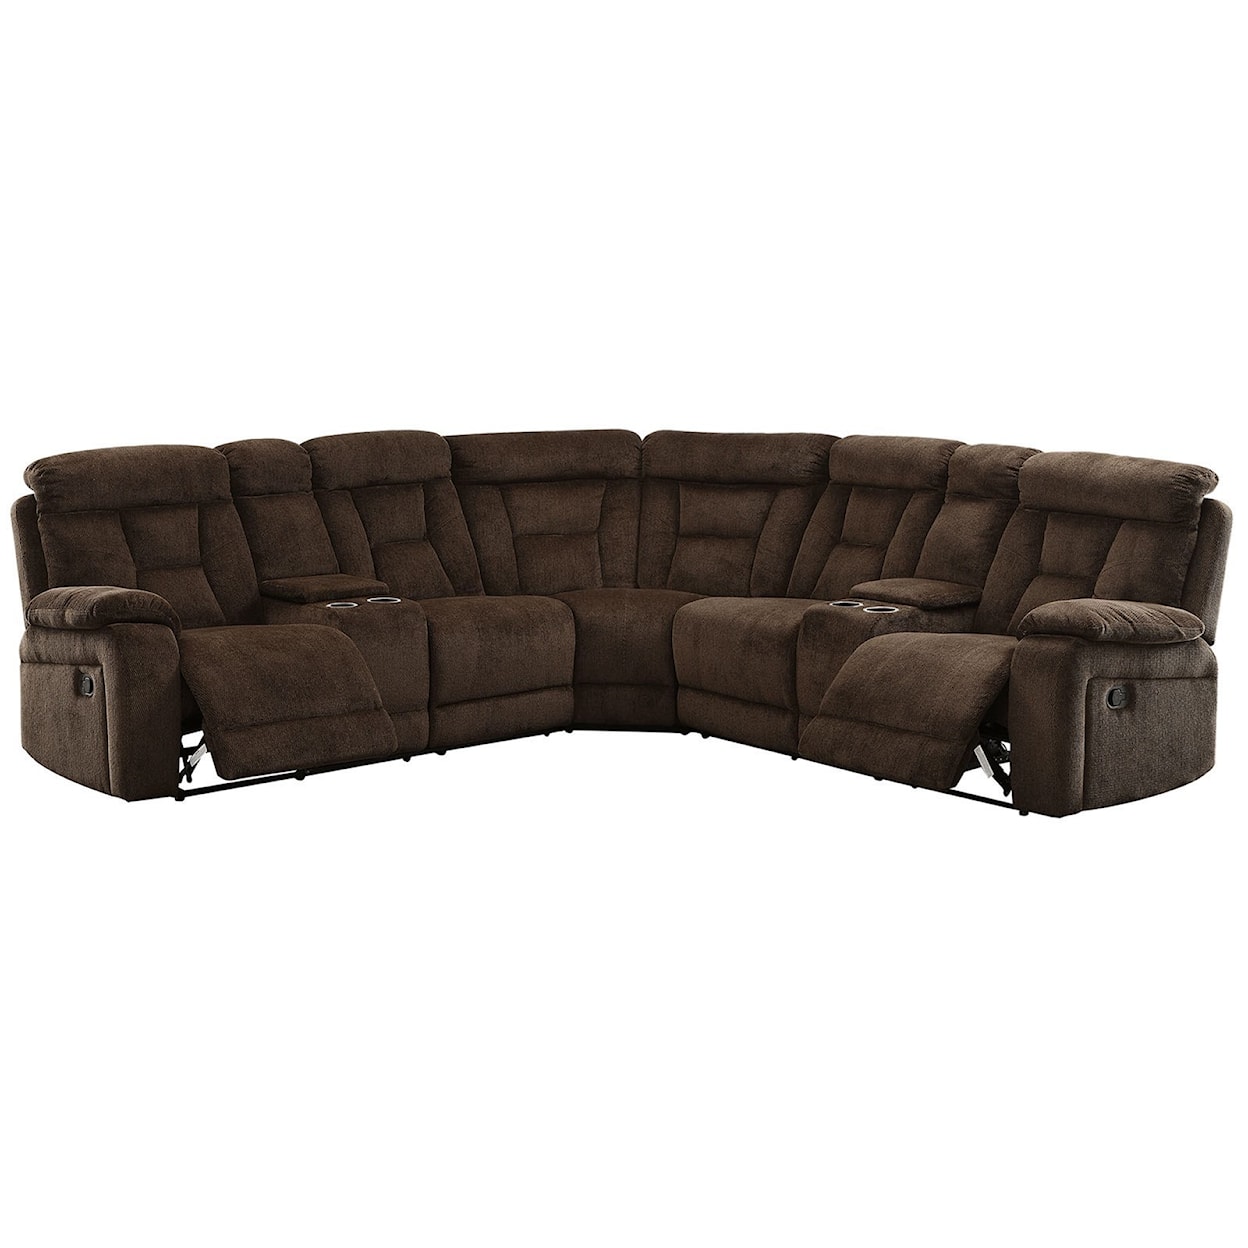 Furniture of America Maybell Sectional